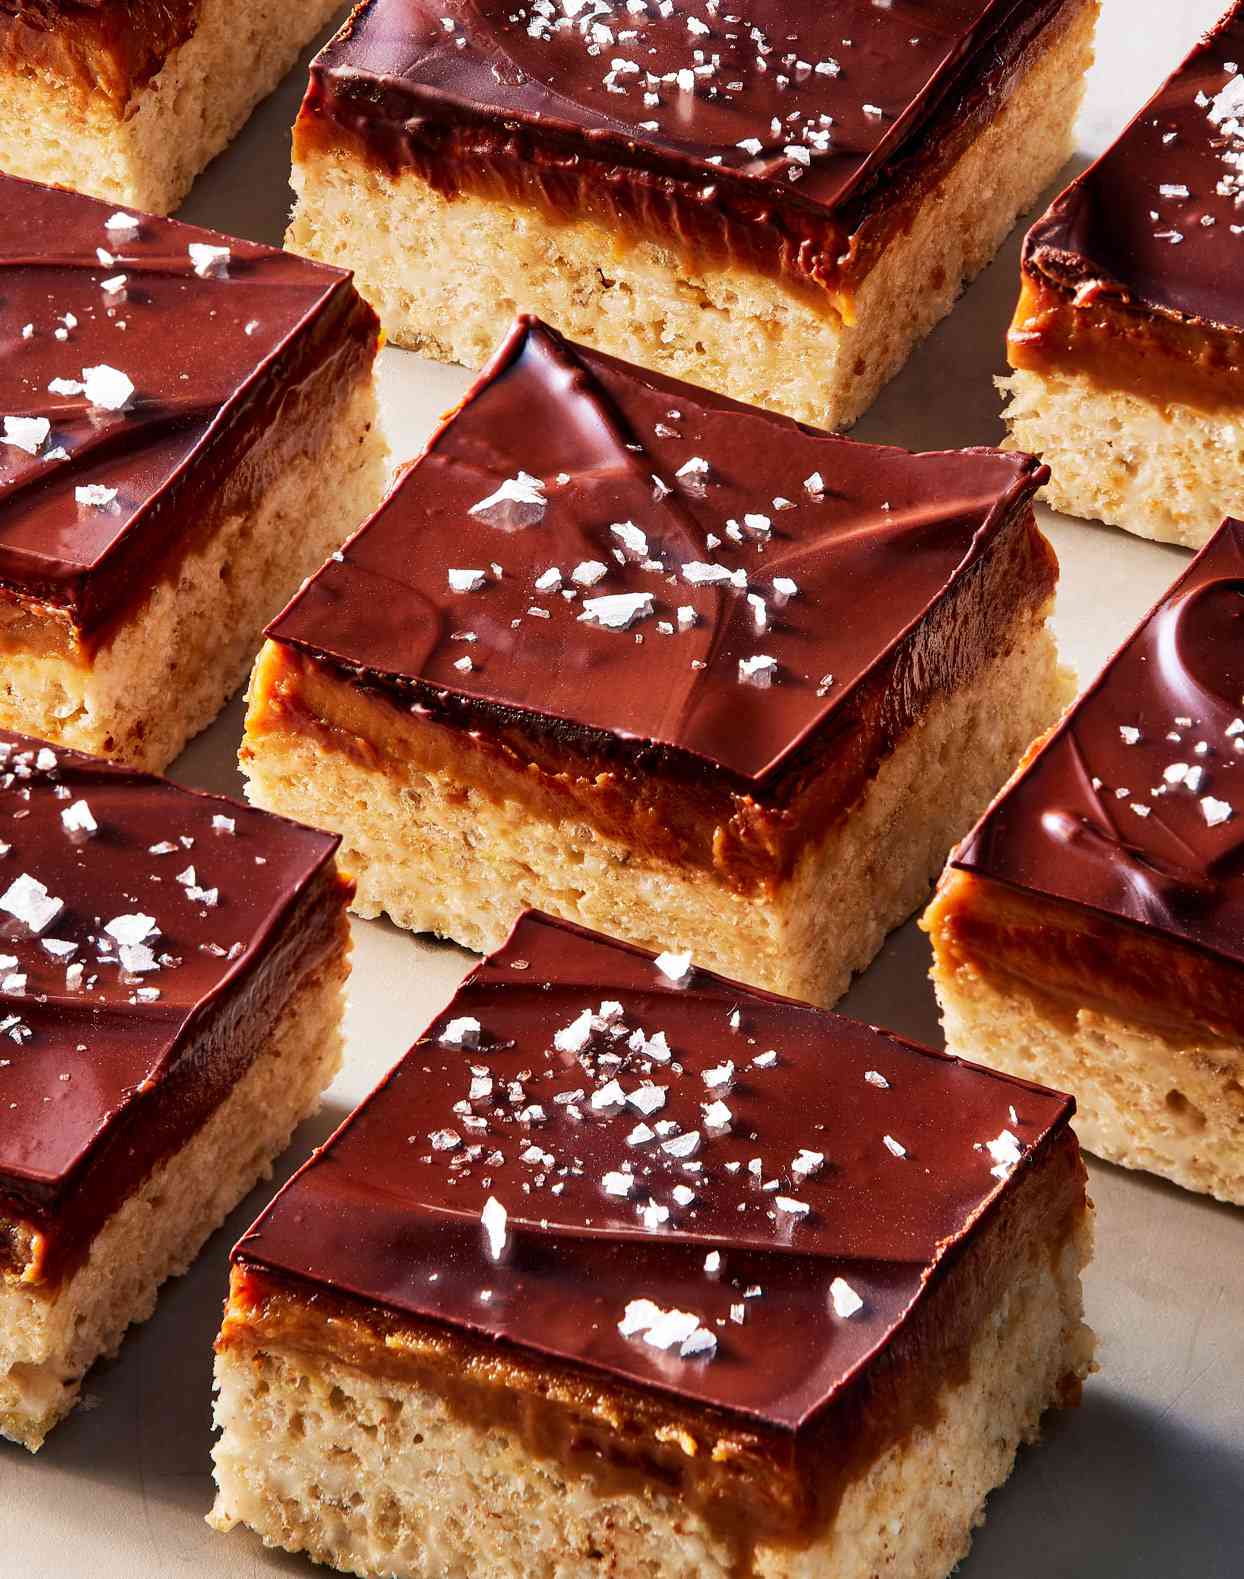 chocolate-peanut-butter-caramel cereal bars topped with flaky sea salt